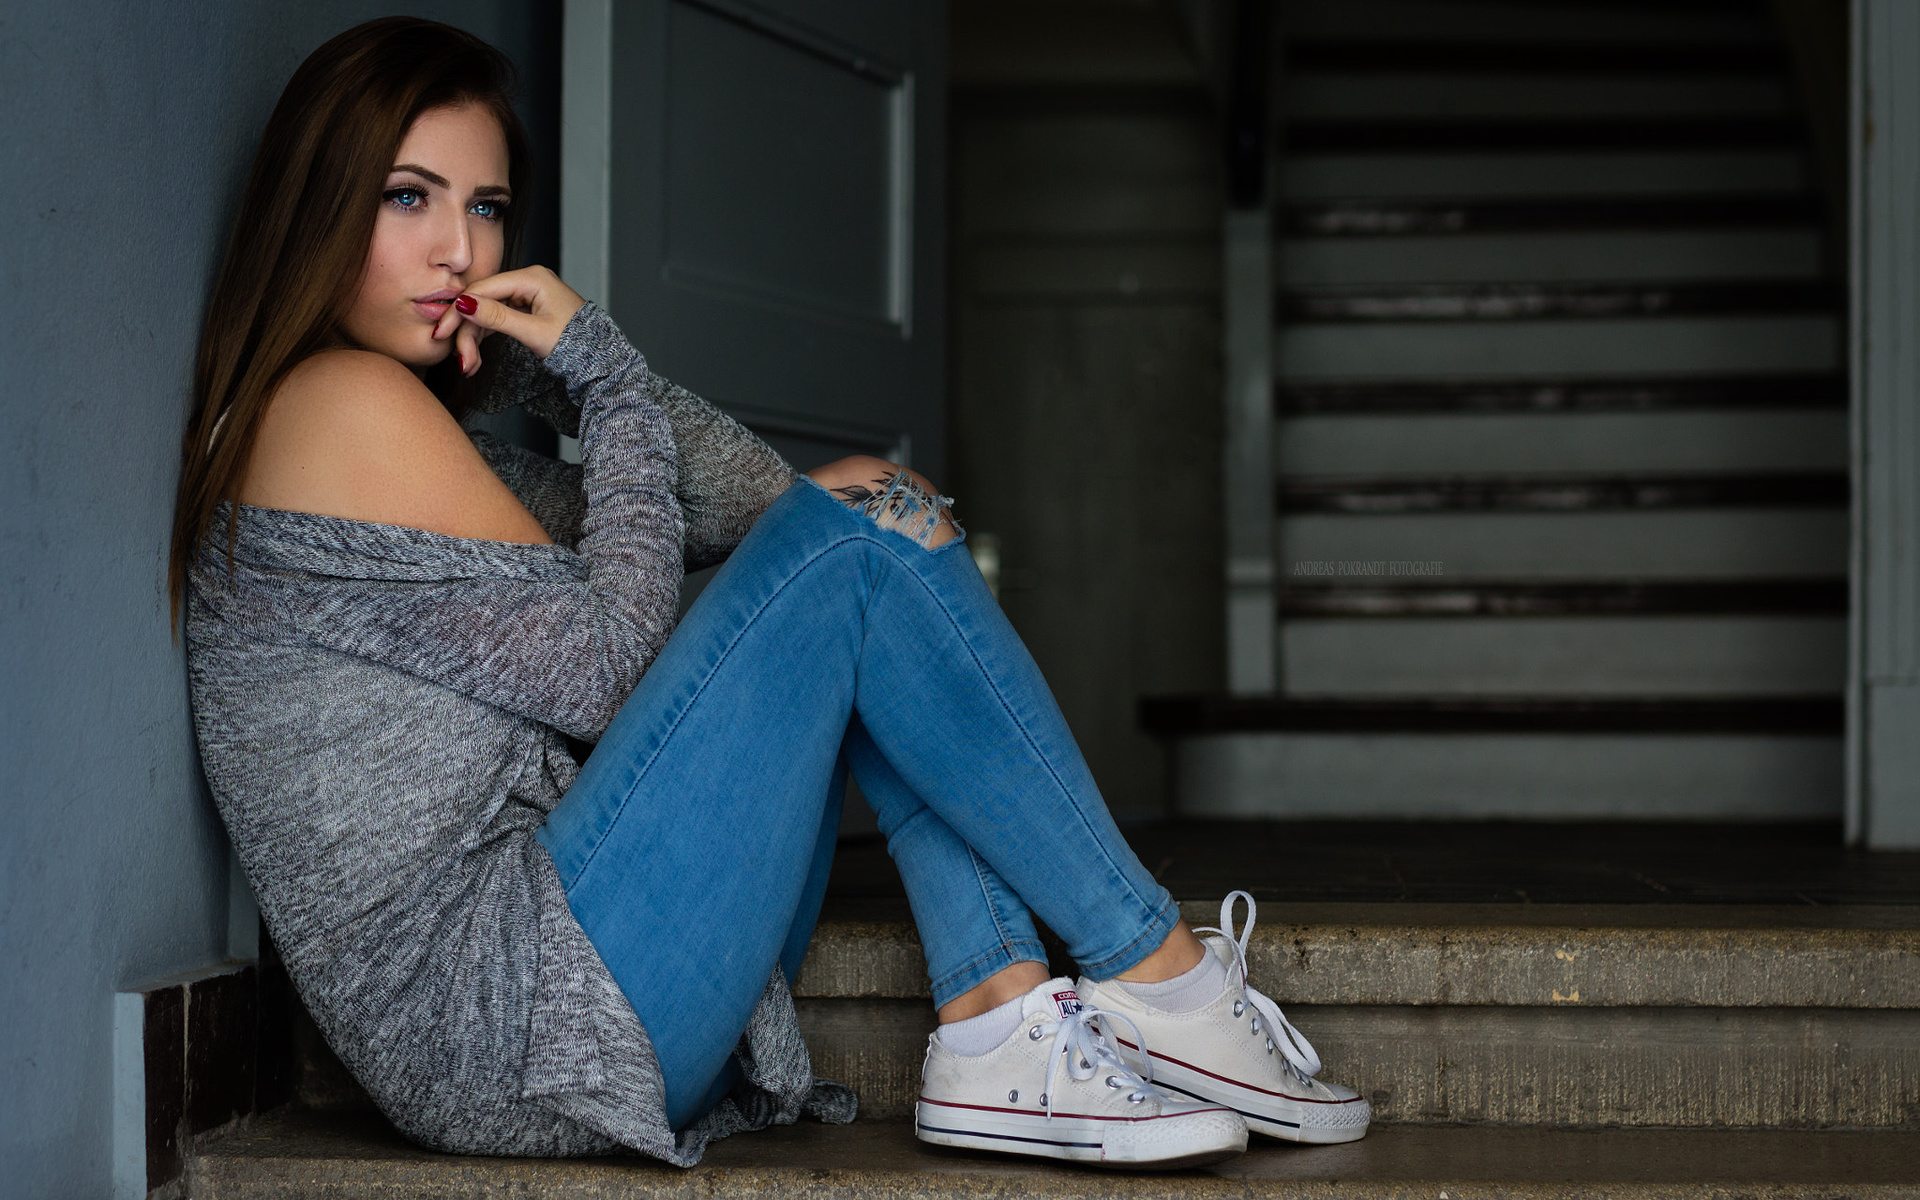 women, blue eyes, converse, torn jeans, red nails, sitting, portrait, sneakers, socks, andreas pokrandt,chelly